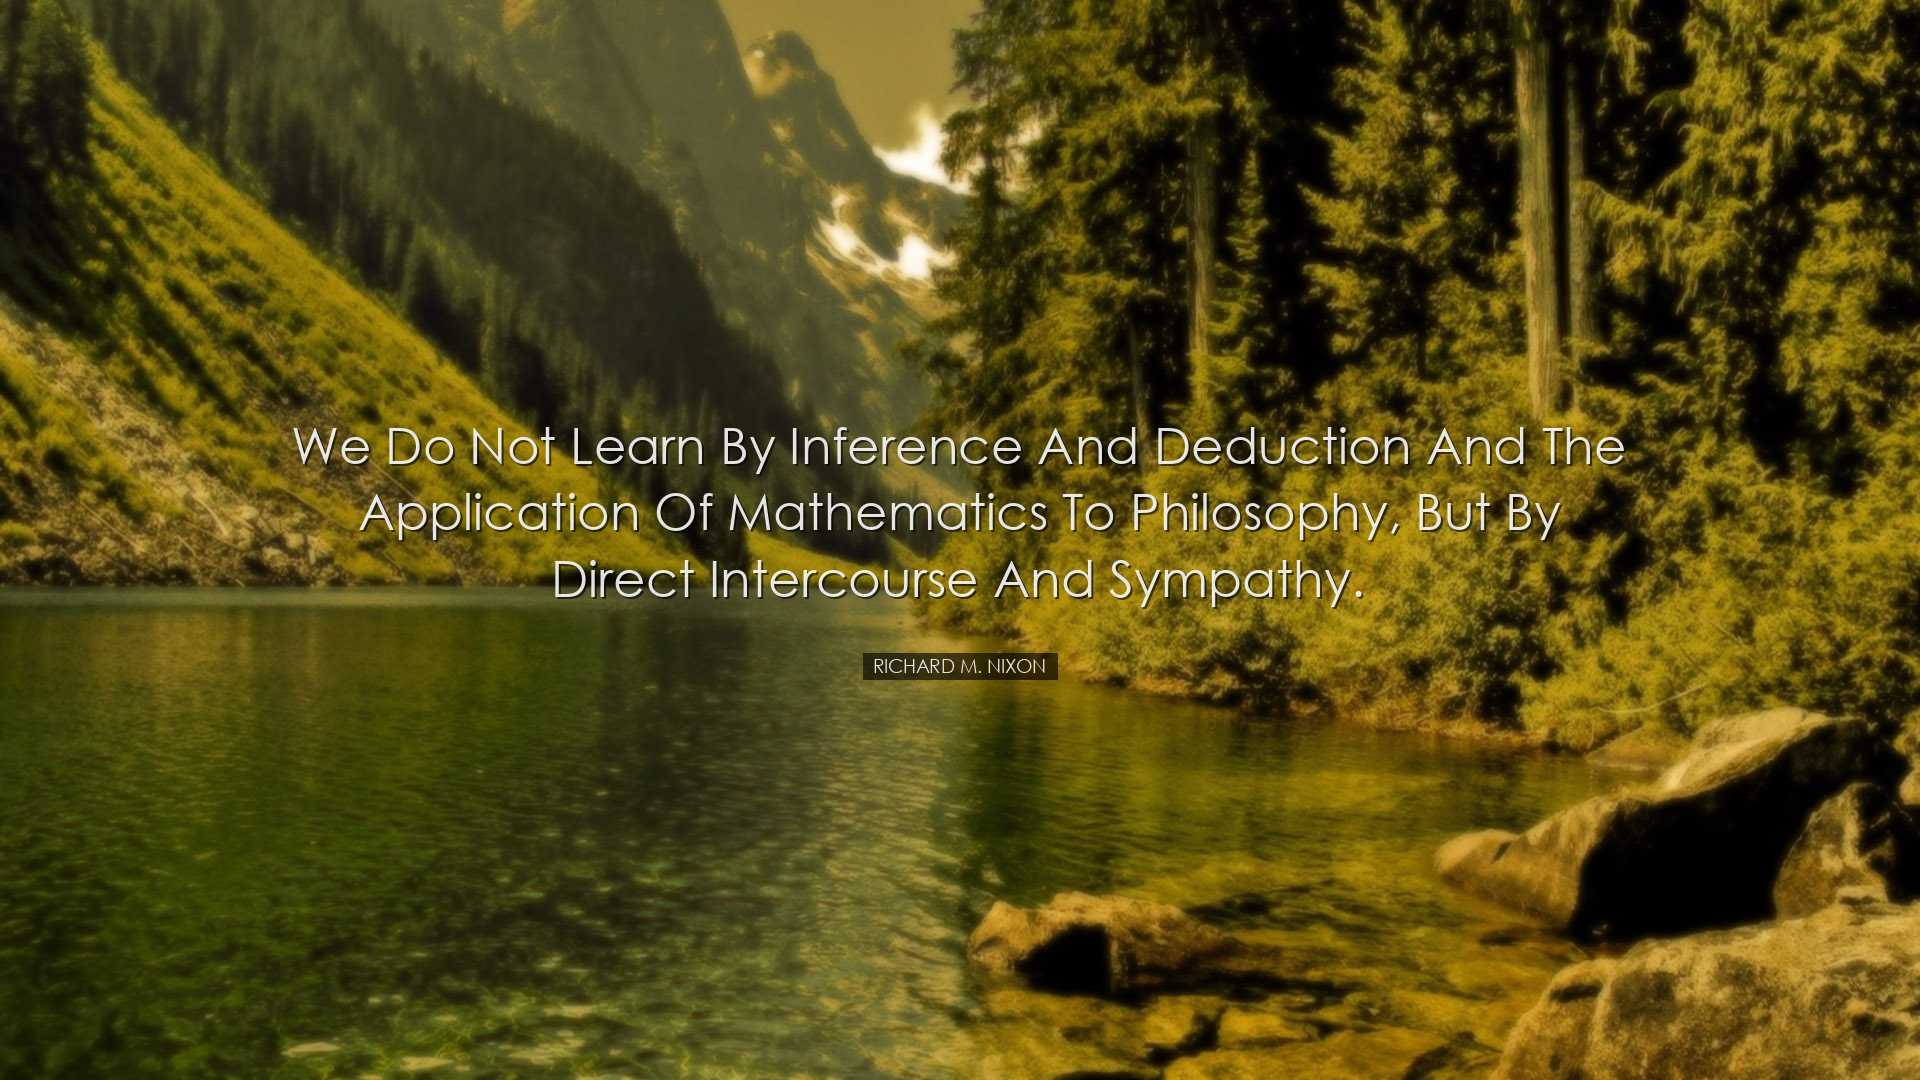 We do not learn by inference and deduction and the application of